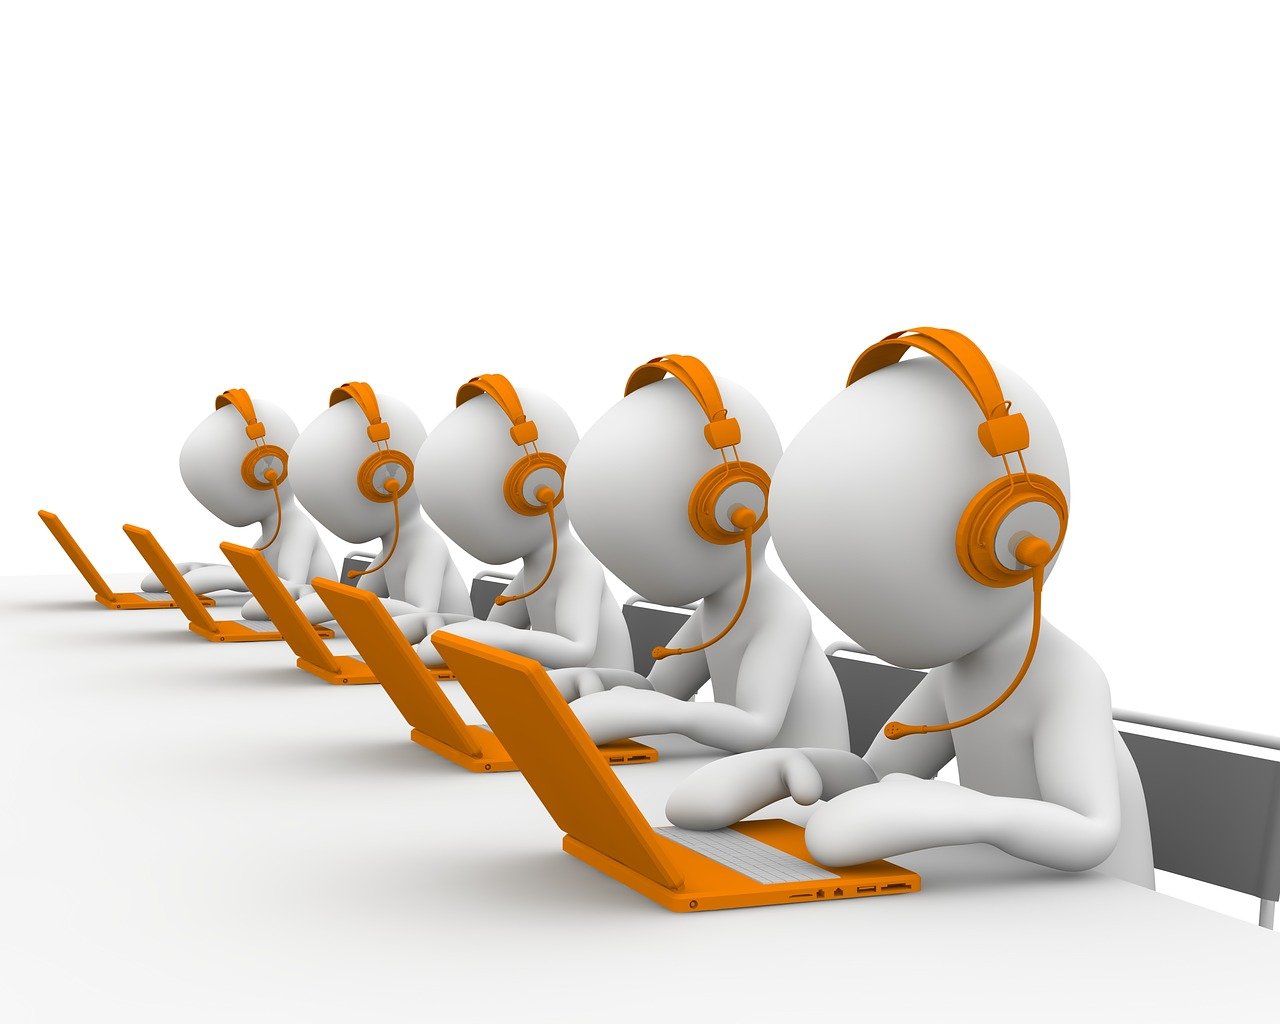 What Are the Key Features of a Good IVR System?